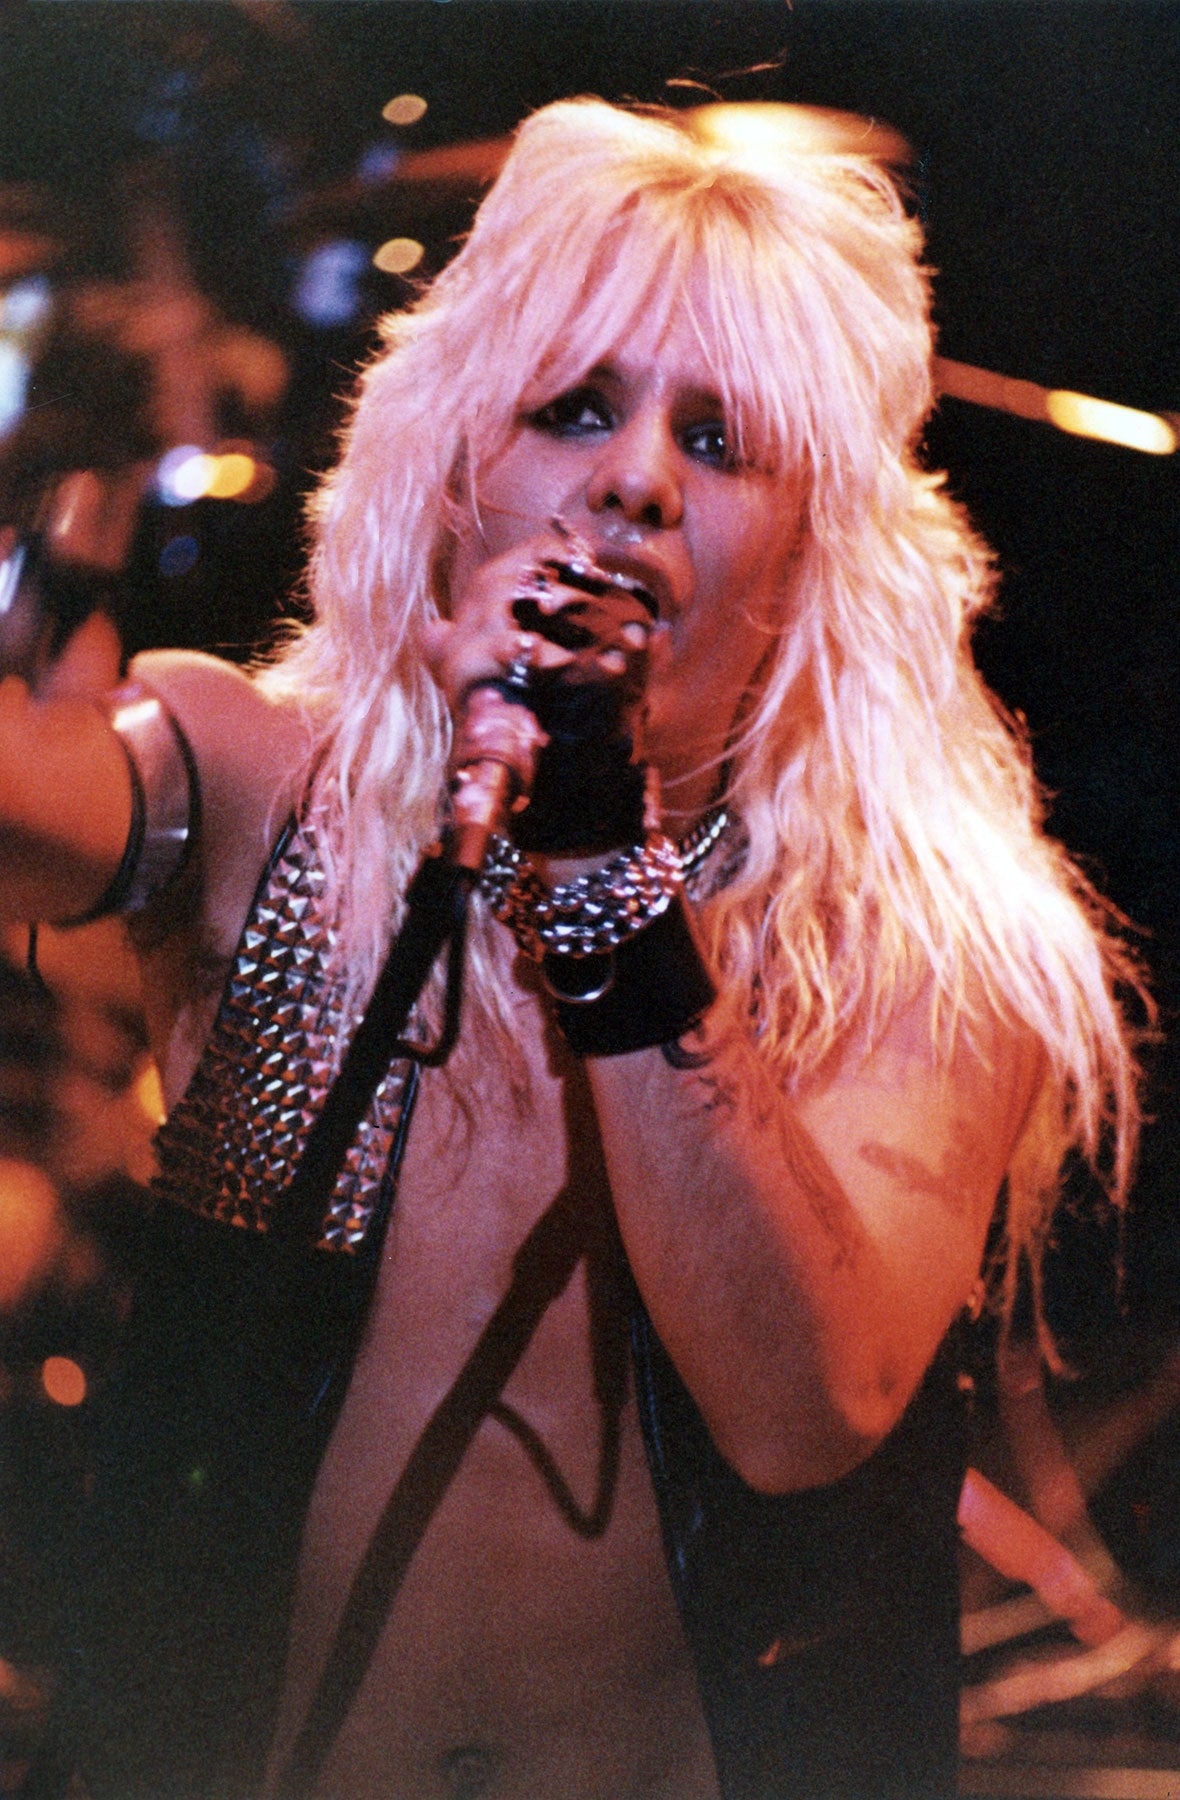 Solo shot of Vince Neil on the Shout At The Devil Tour 1983